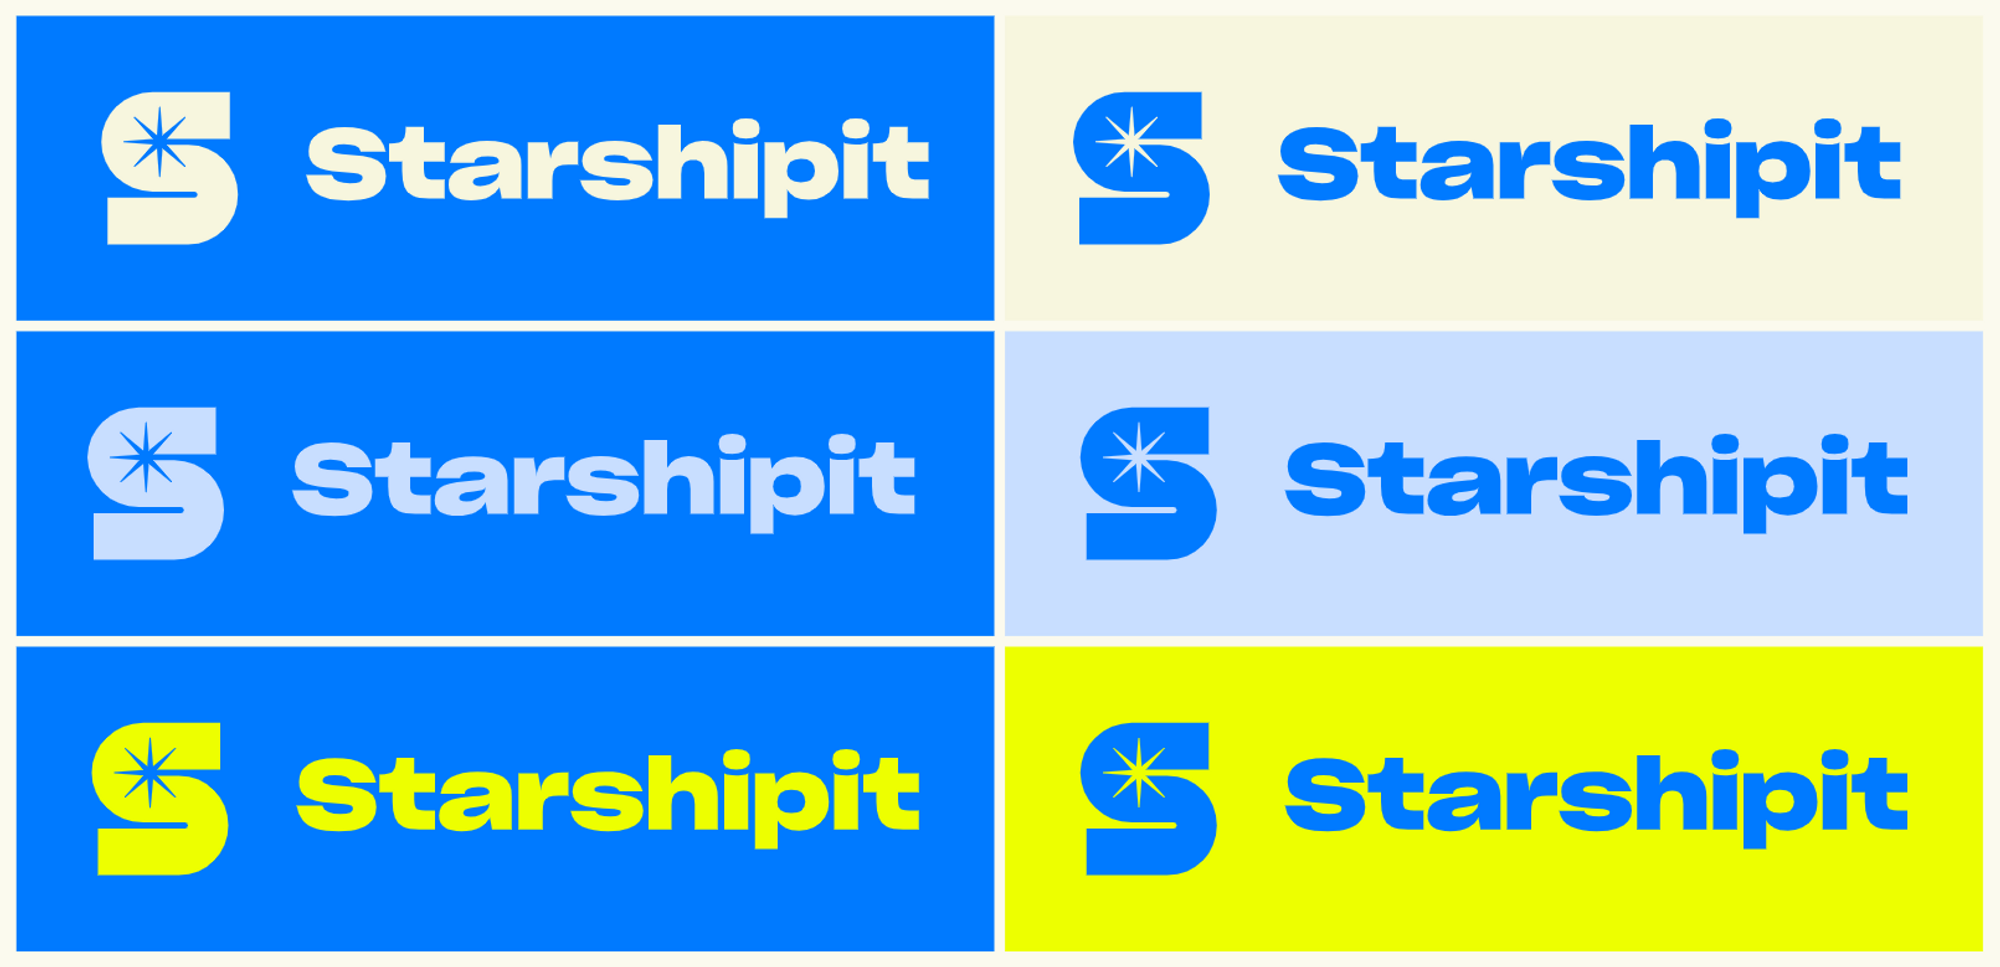 Starshipit brand colours: blue, cream and yellow colour combinations